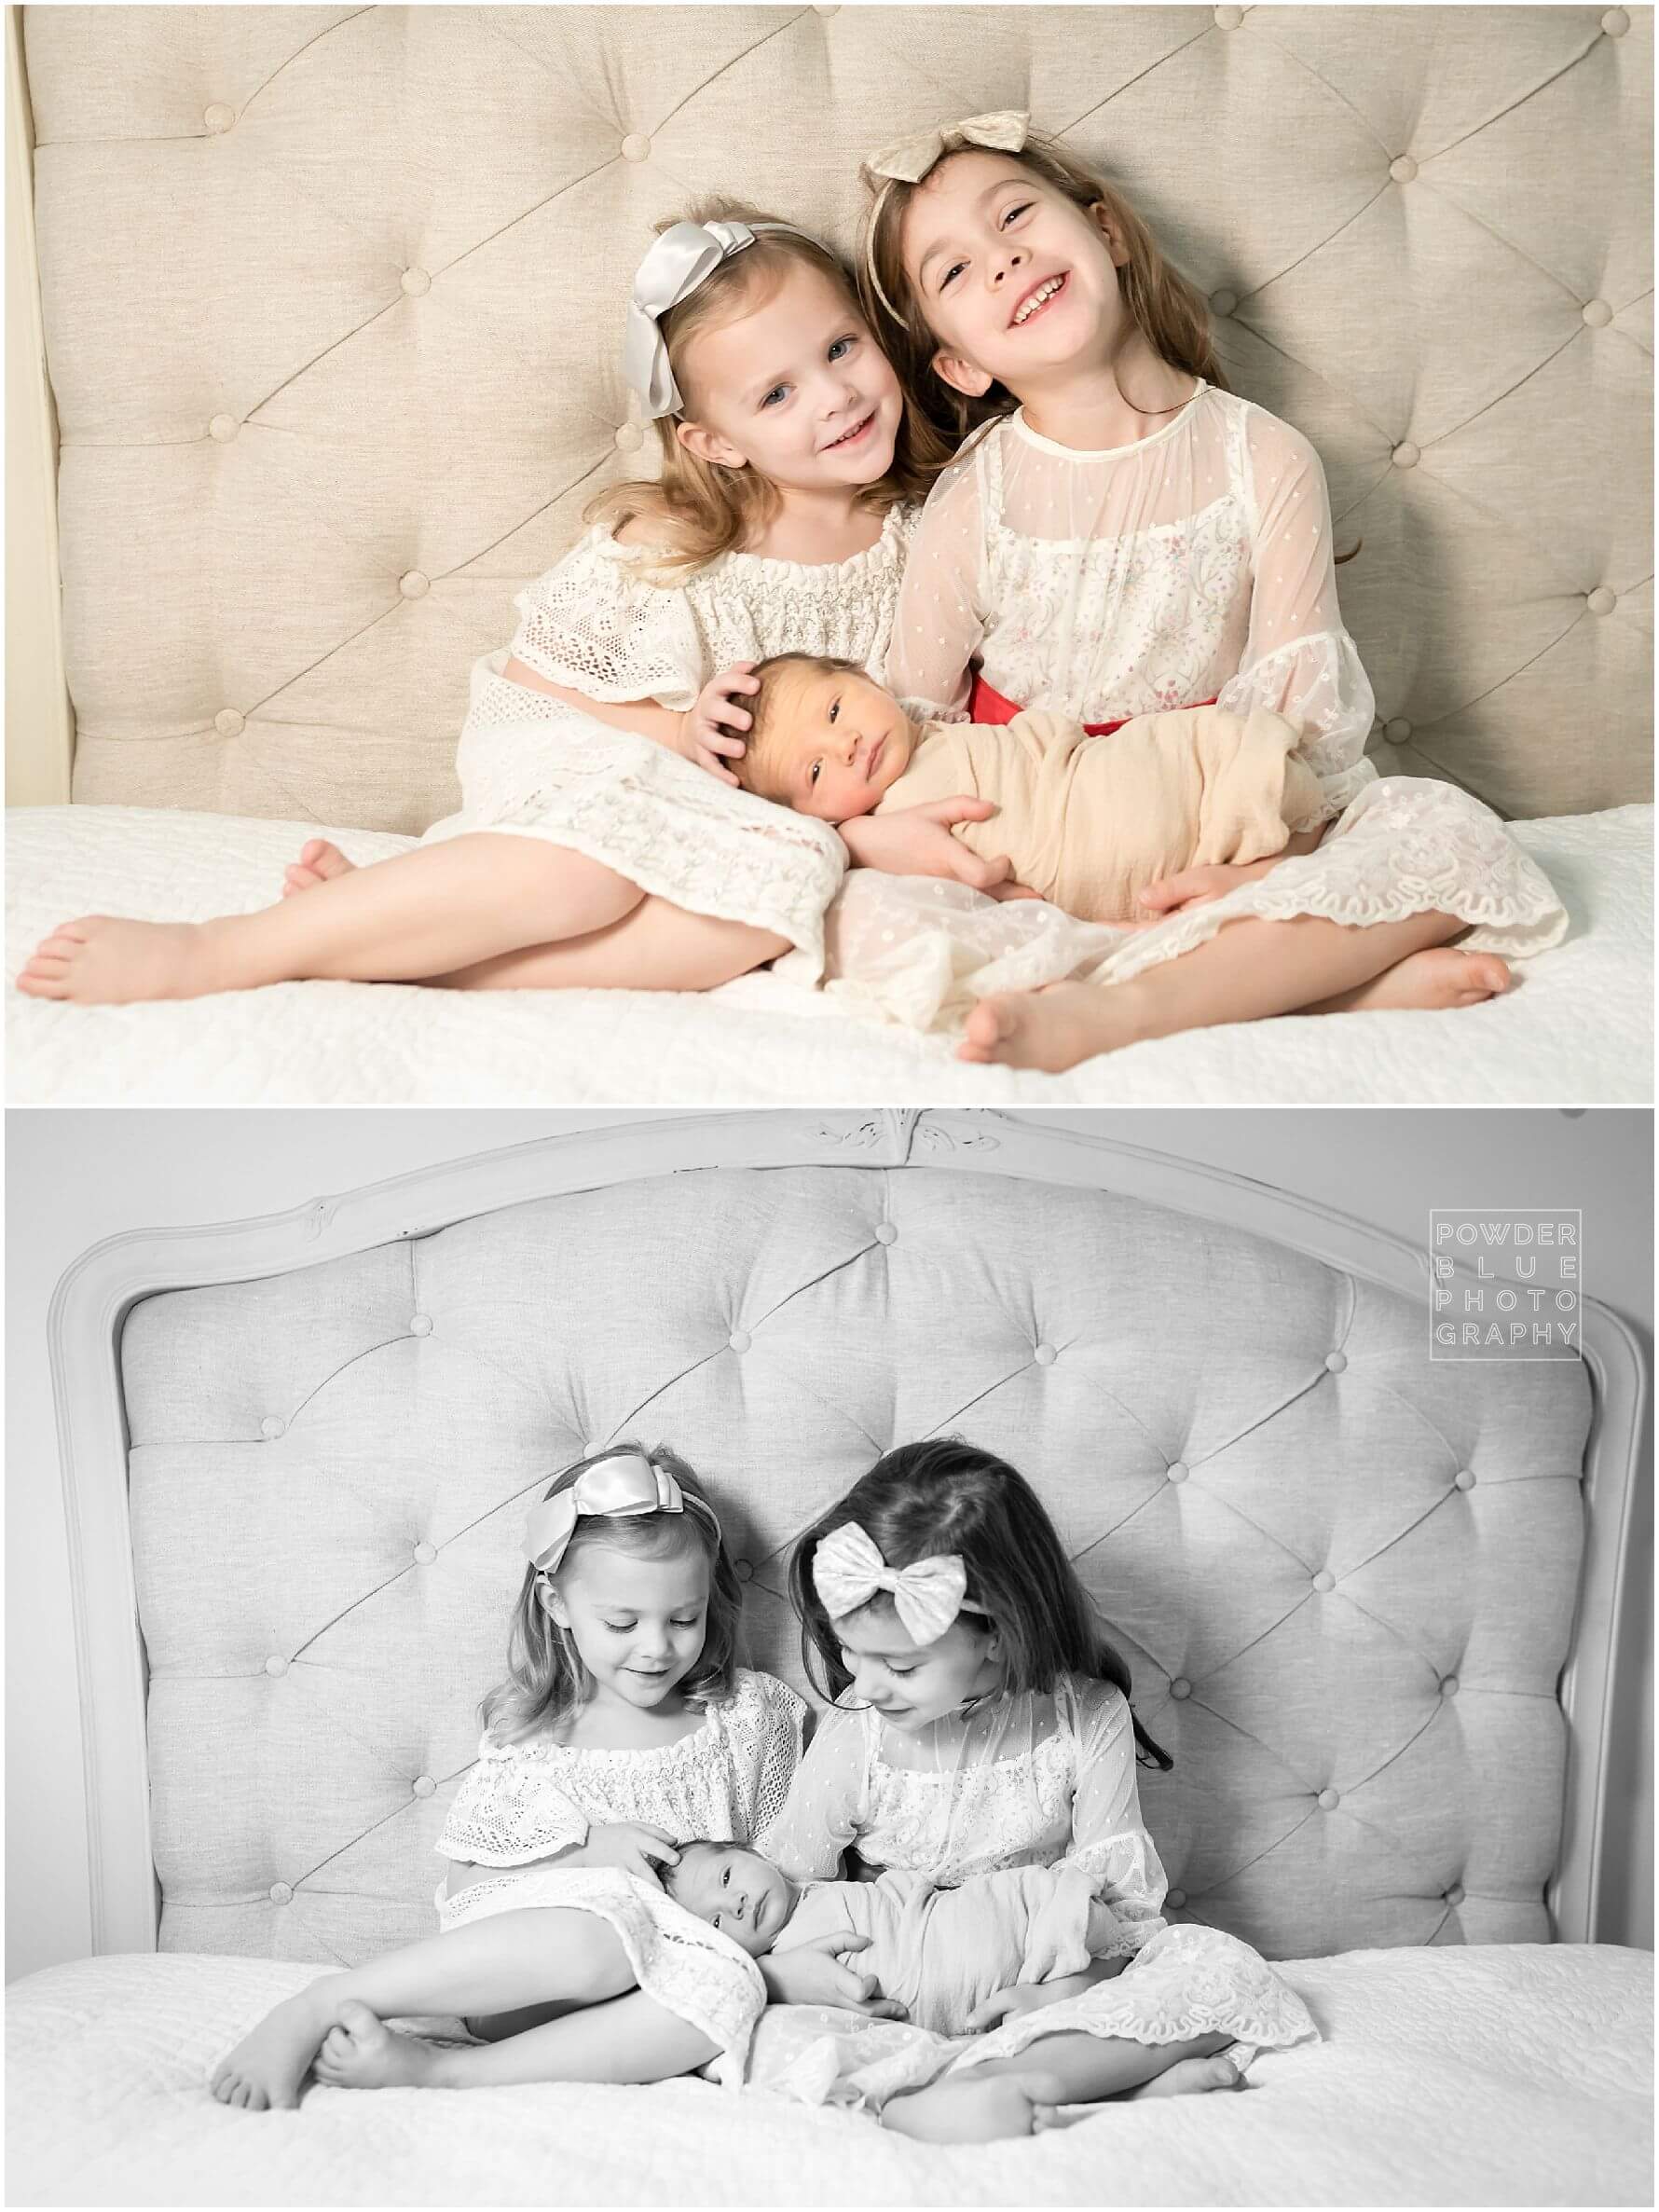 two sisters with their newborn baby brother by Missy Timko, who photographs pittsburgh's newborn babies.